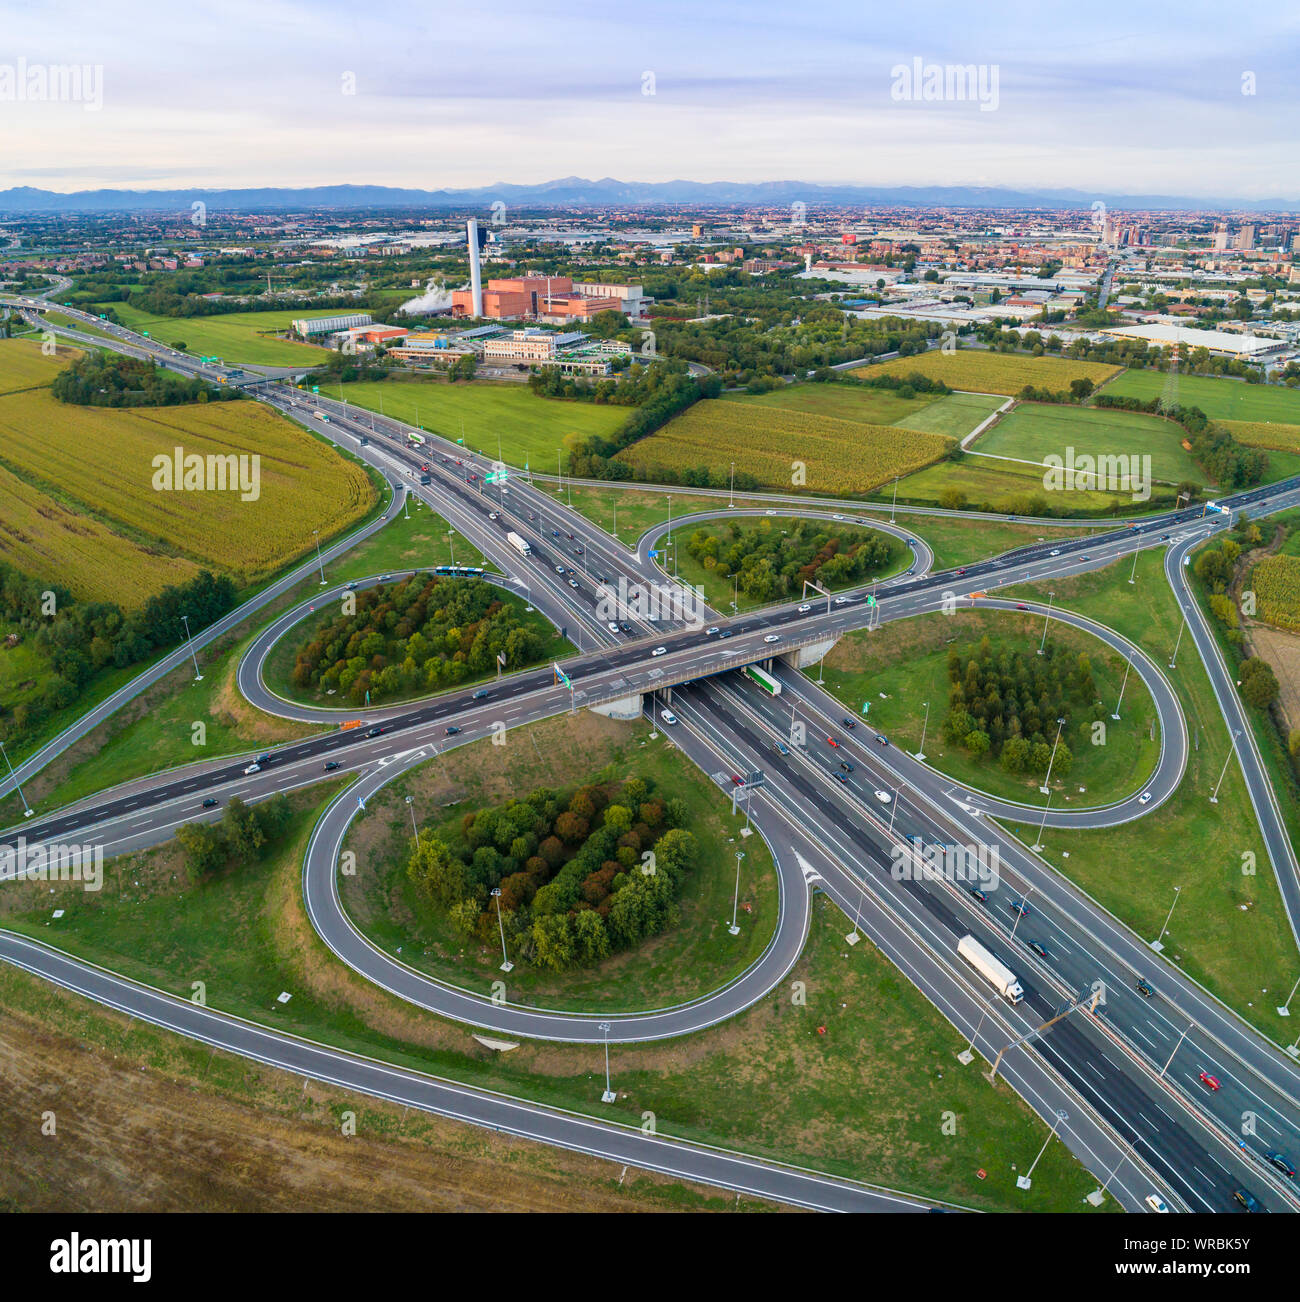 Cloverleaf interchange seen from above. Aerial view of highway road junction in the countryside. Bird's eye view. Stock Photo